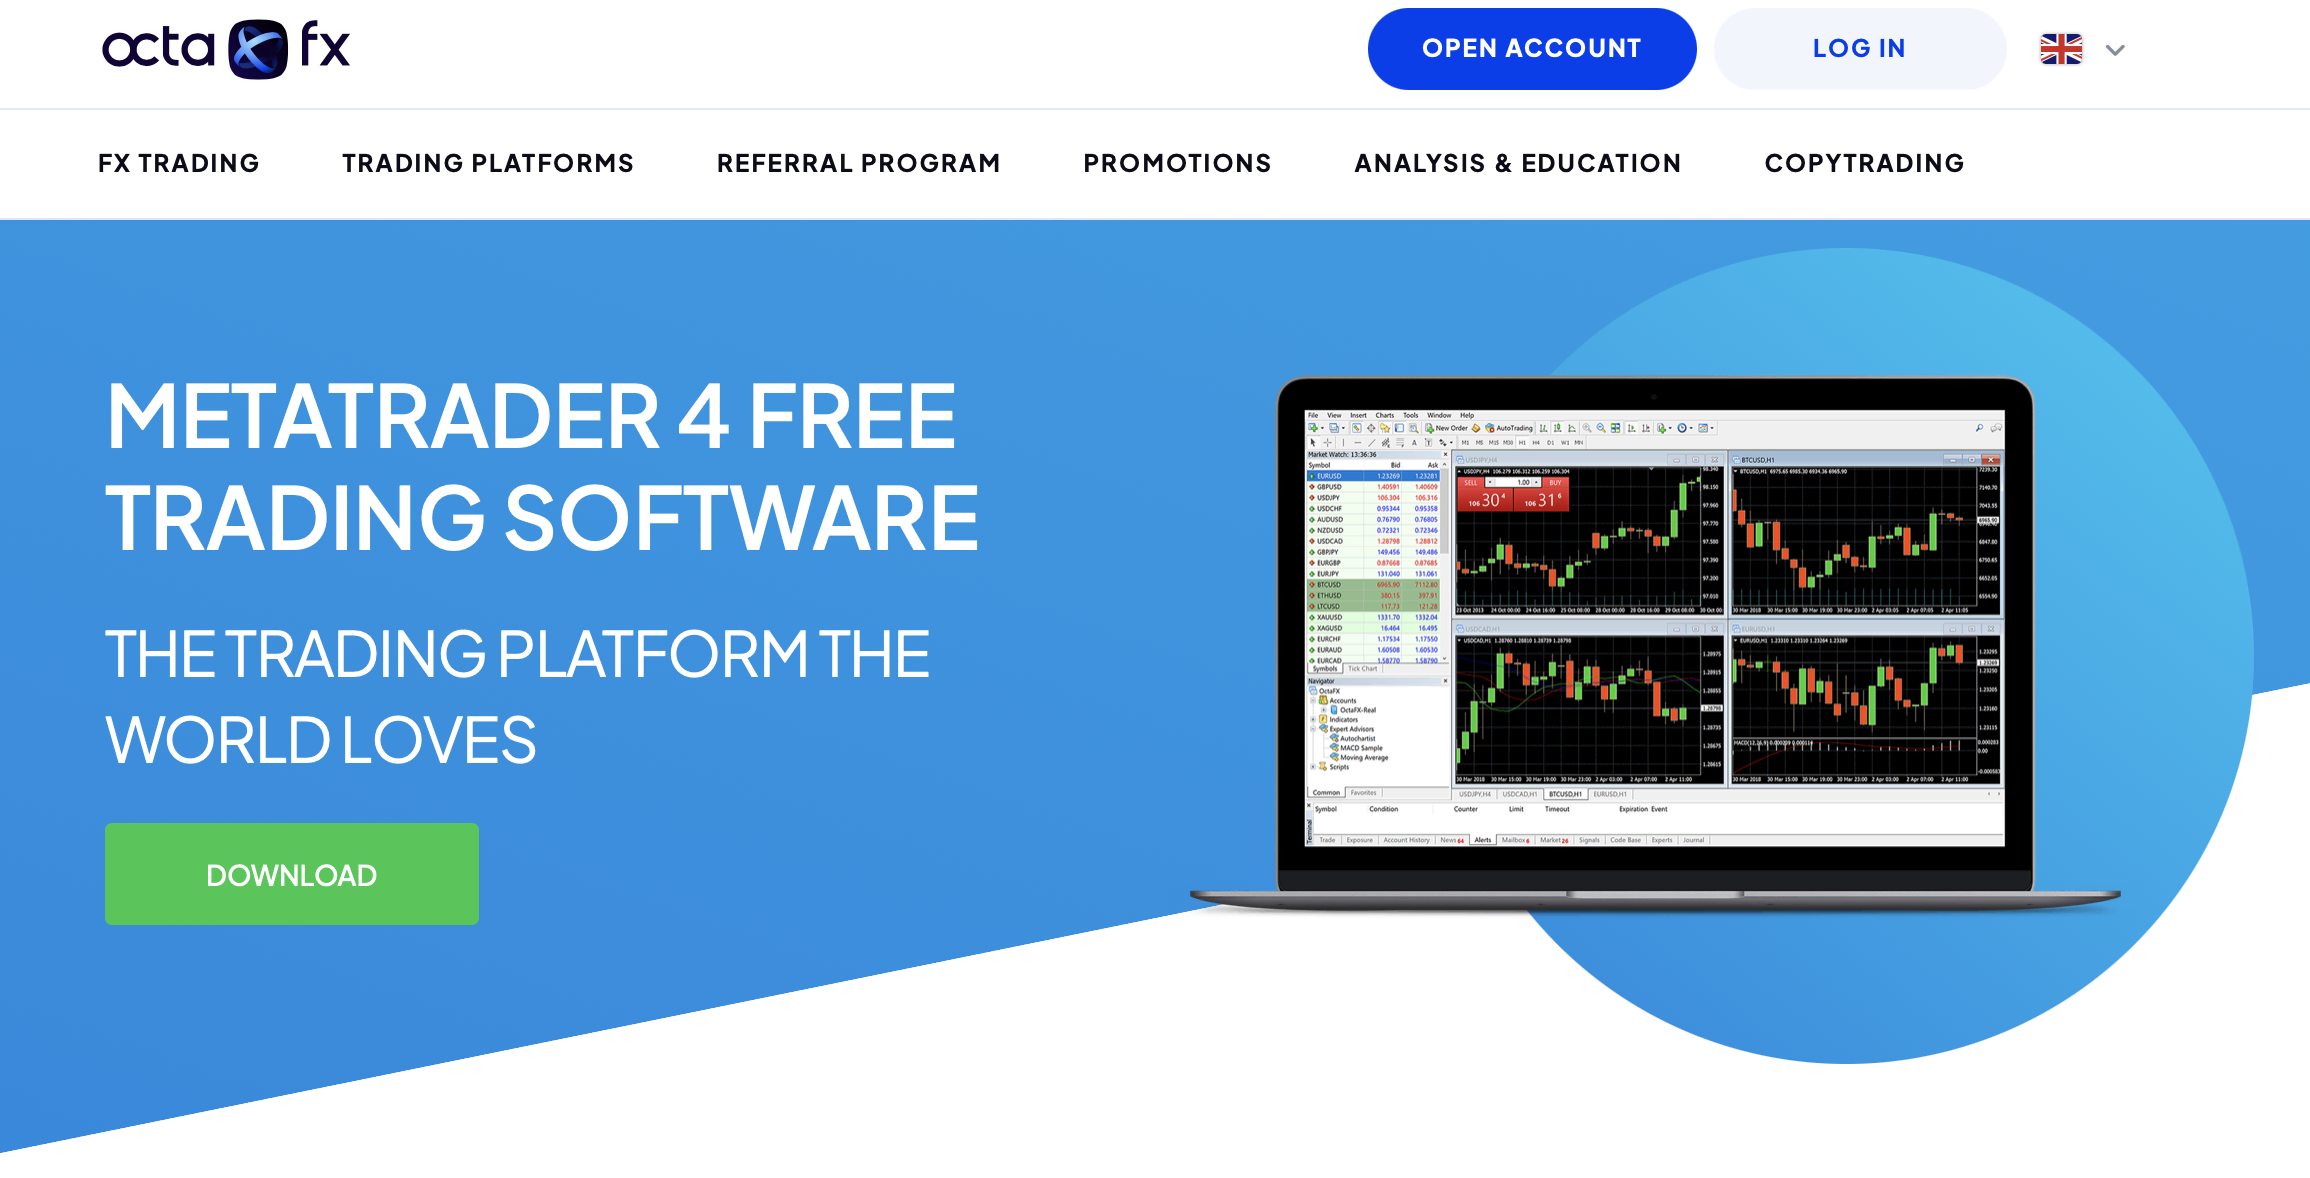 The official landingpage of the OctaFX MetaTrader 4